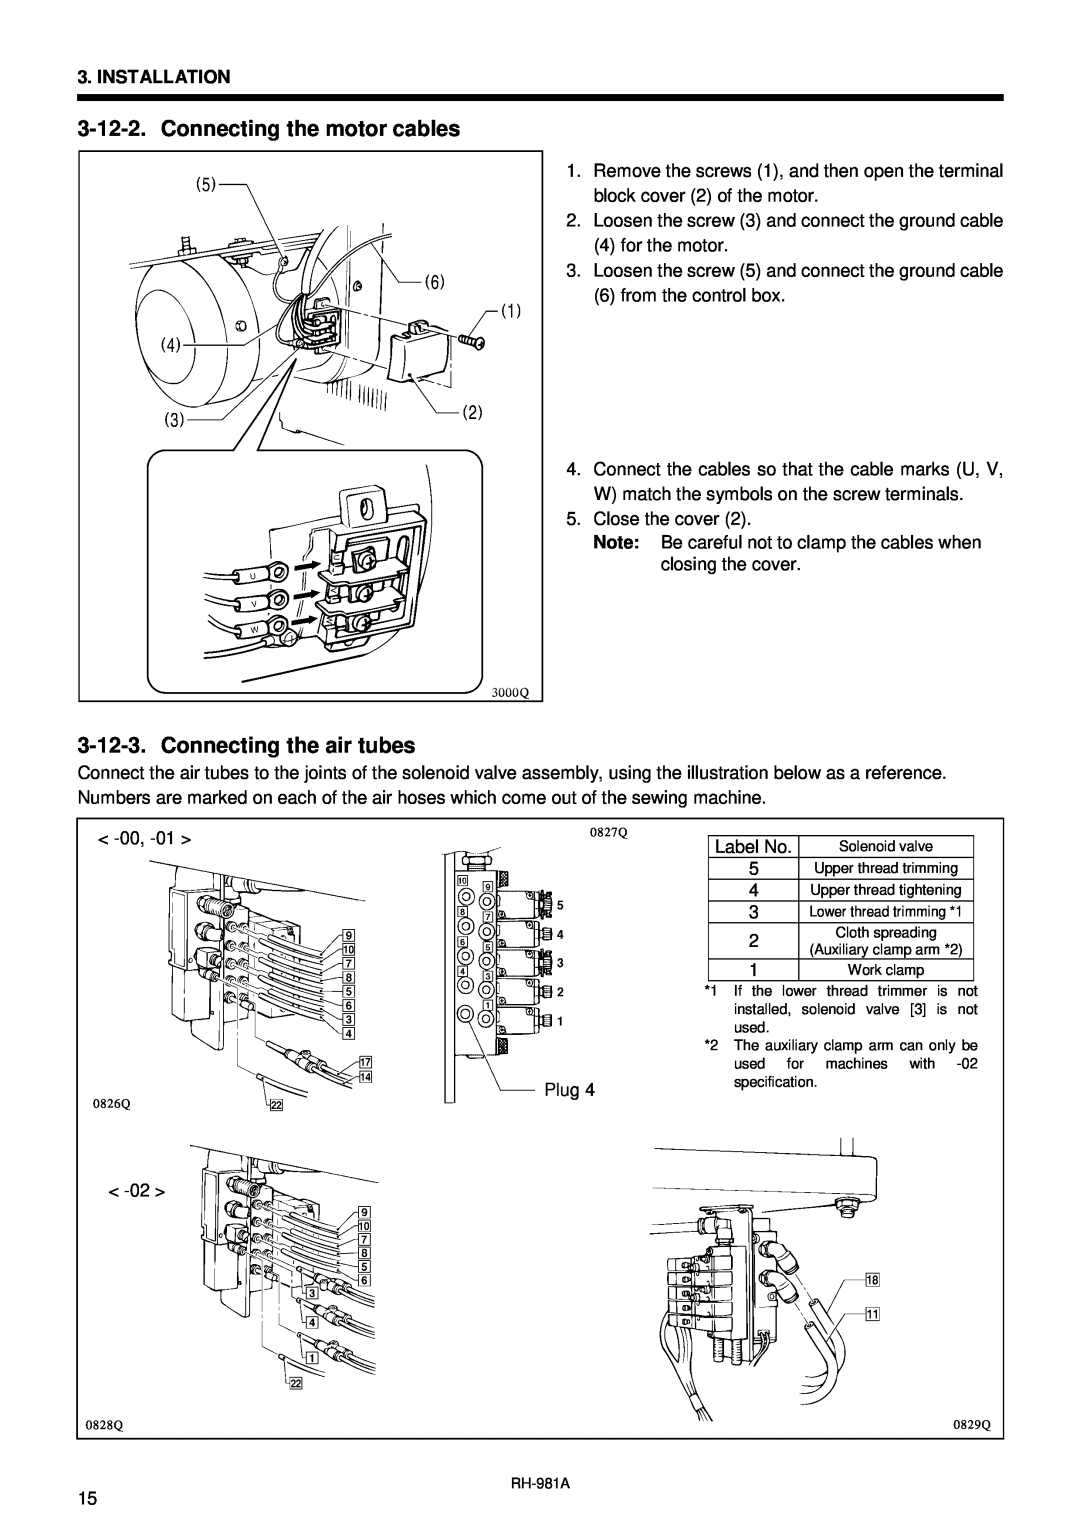 Brother rh-918a manual Connecting the motor cables, Connecting the air tubes 